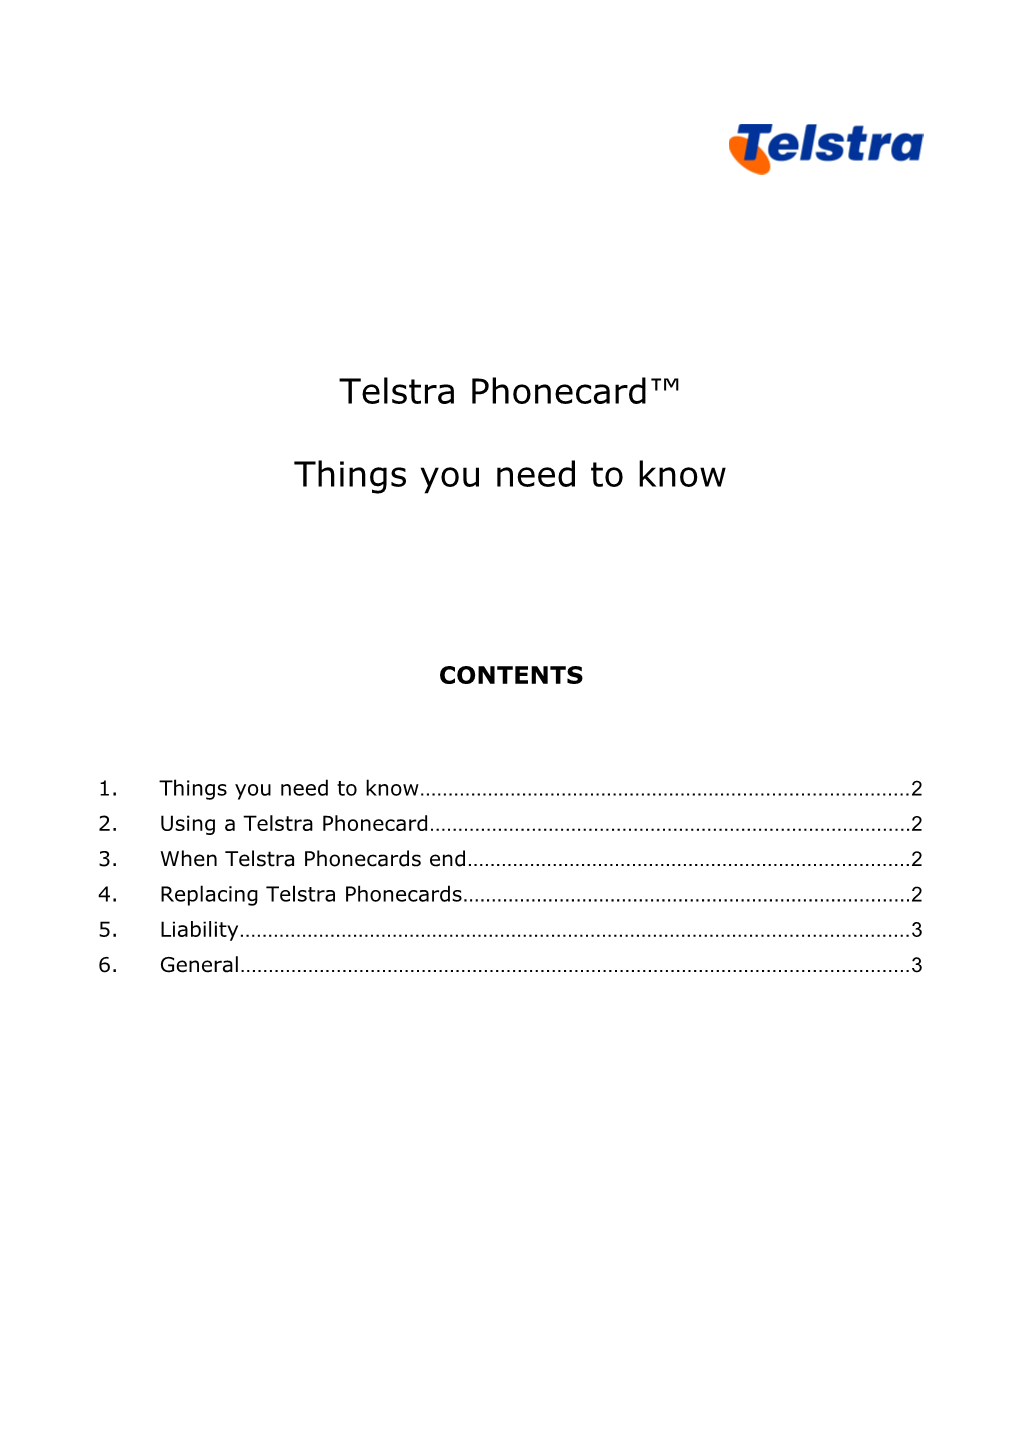 Telstra Phonecard - Things You Need to Know